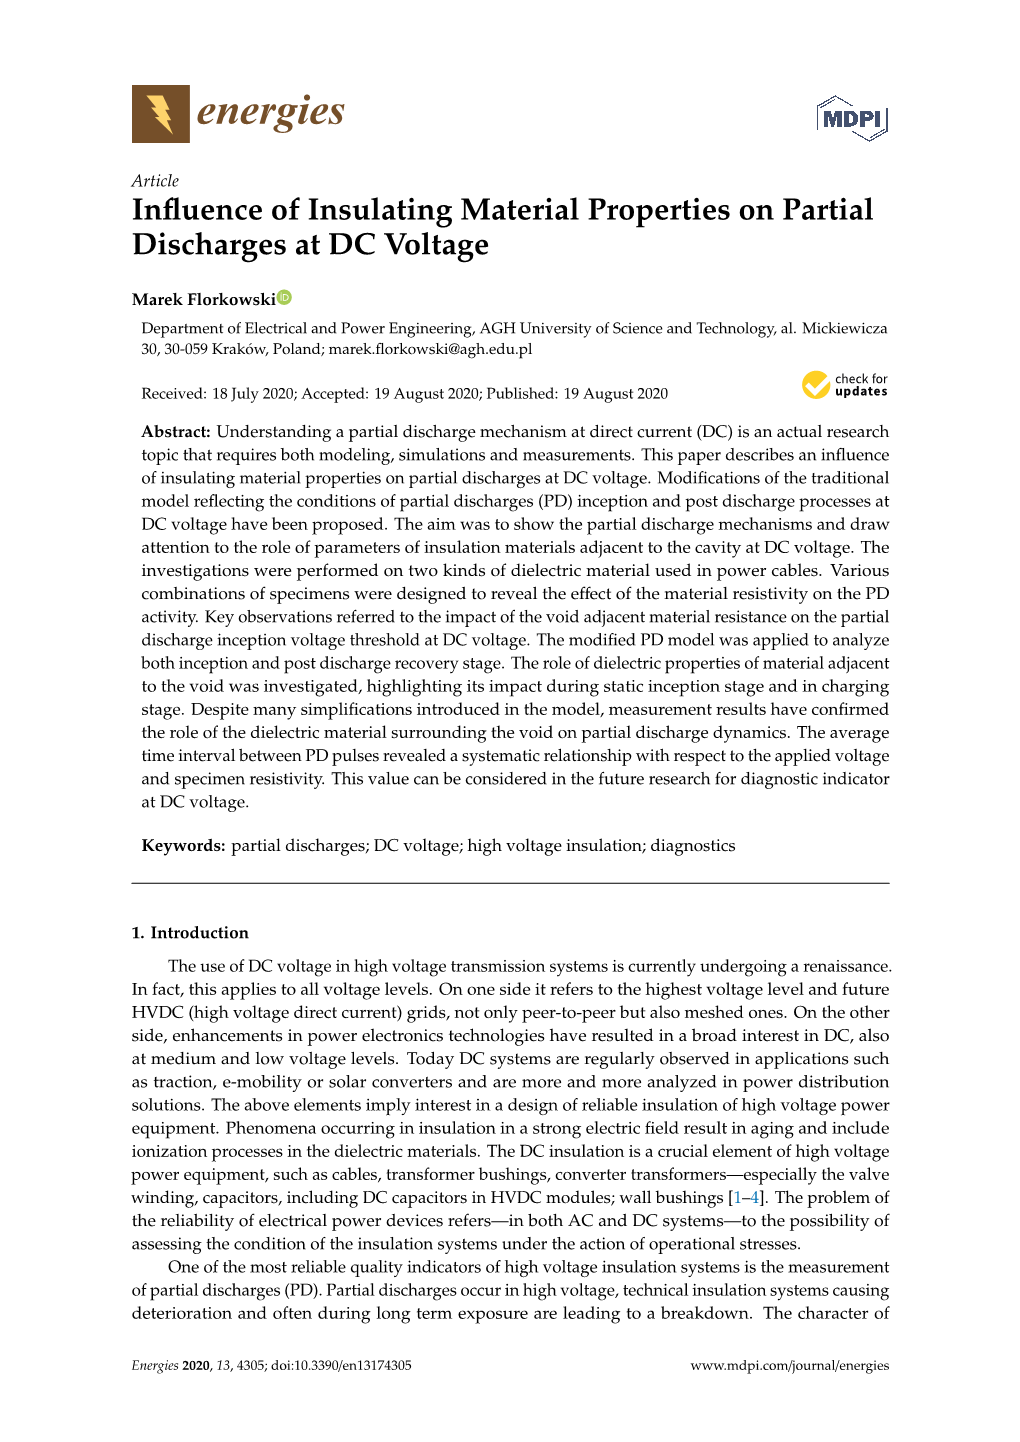 Influence of Insulating Material Properties on Partial Discharges at DC Voltage